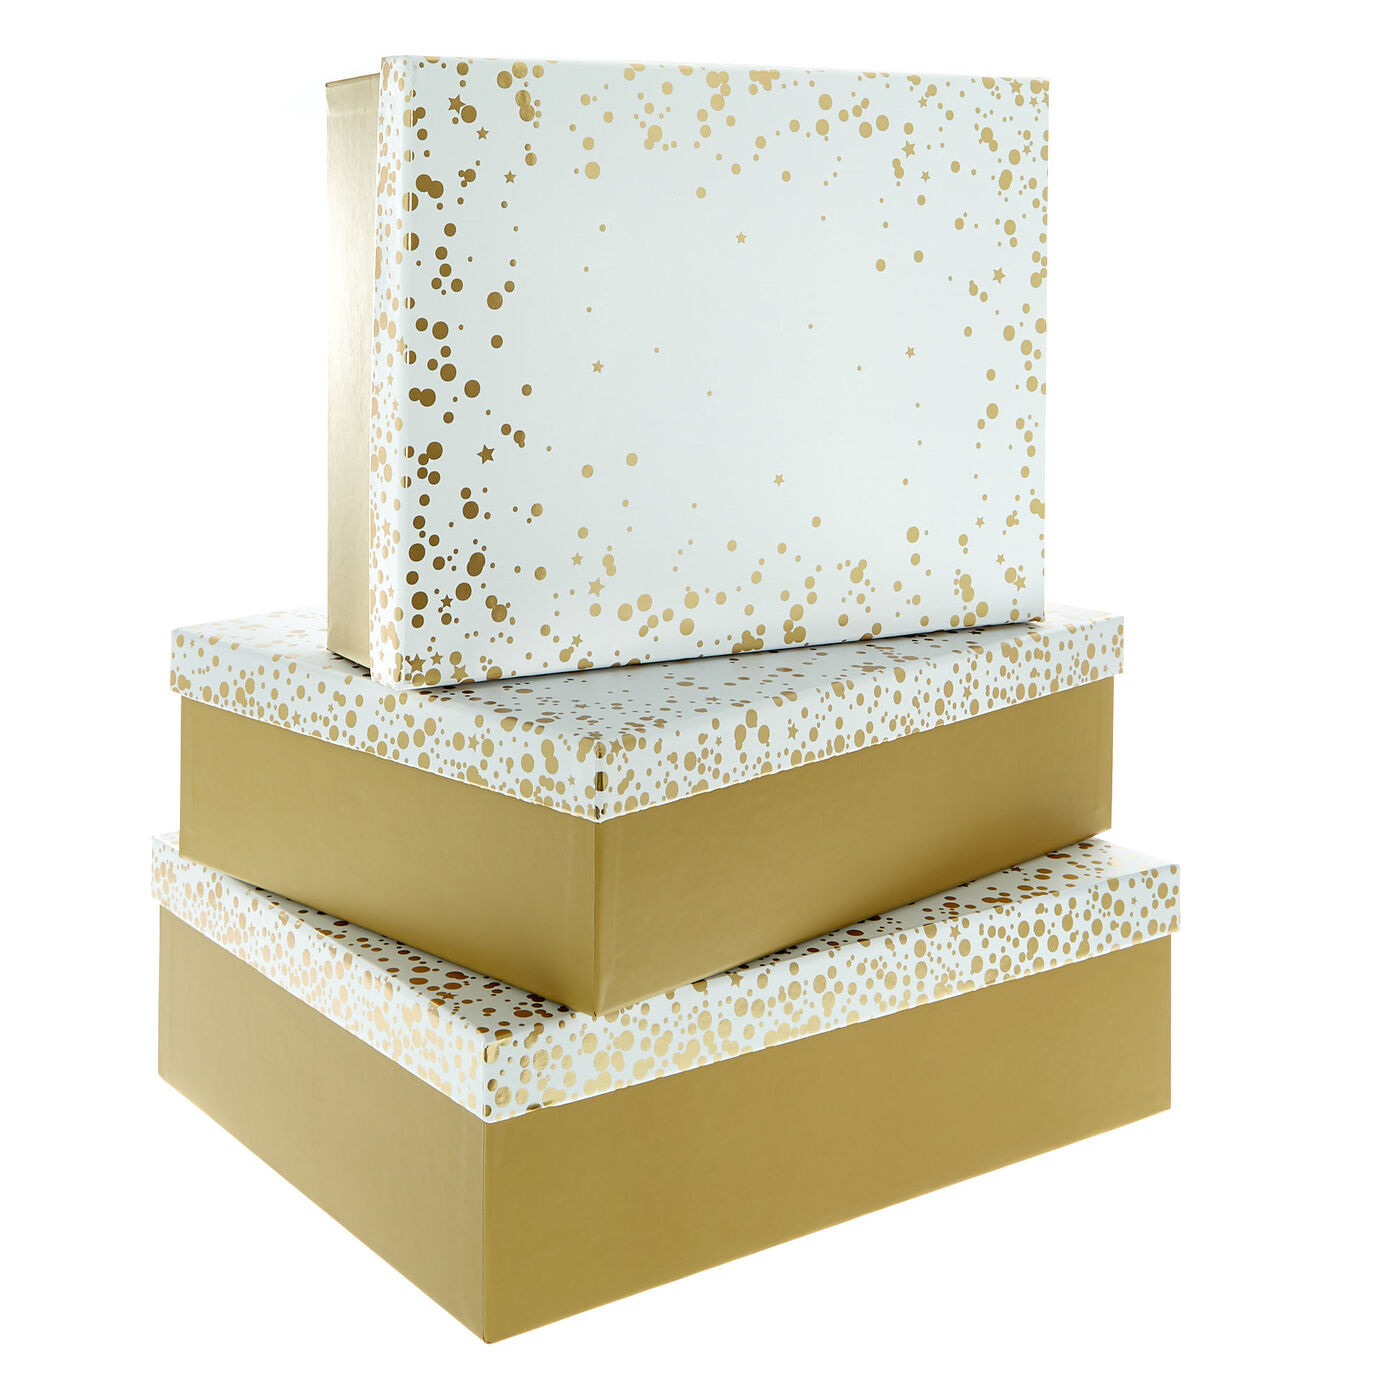 Set of 10 Nesting Gift Boxes with Lids, Cardboard Box with Gold Foil Star  Designs (10 Sizes)